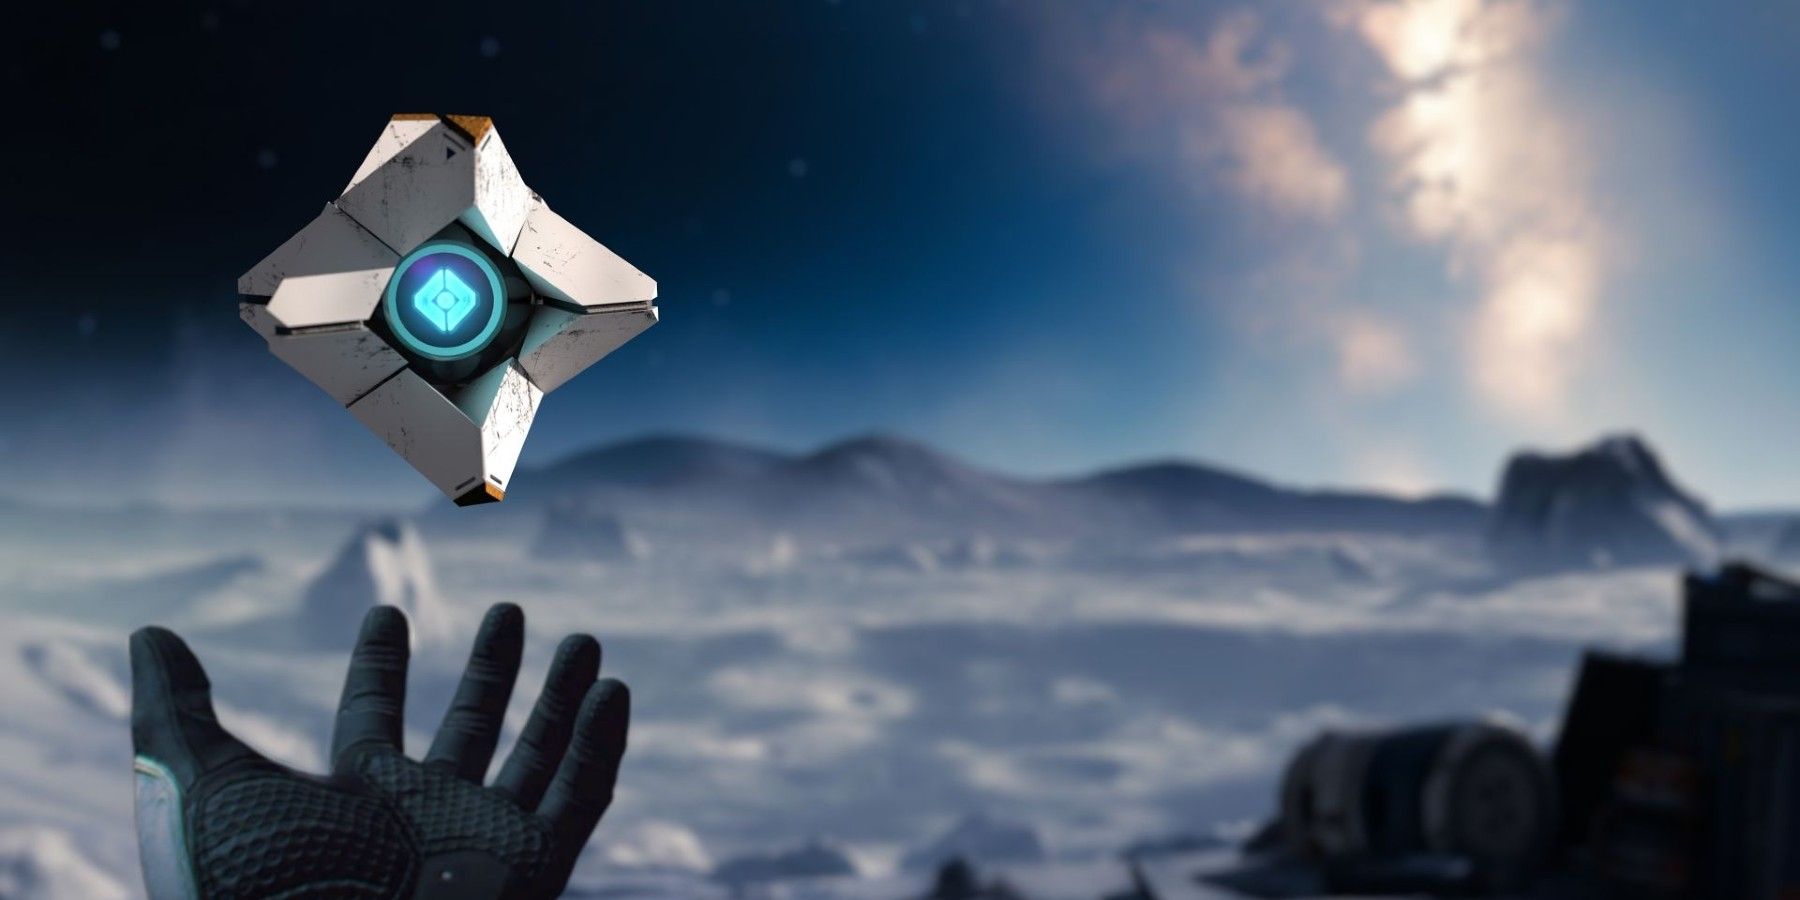 Destiny 2 Fan Uses Blender to Design Their Own Ghost